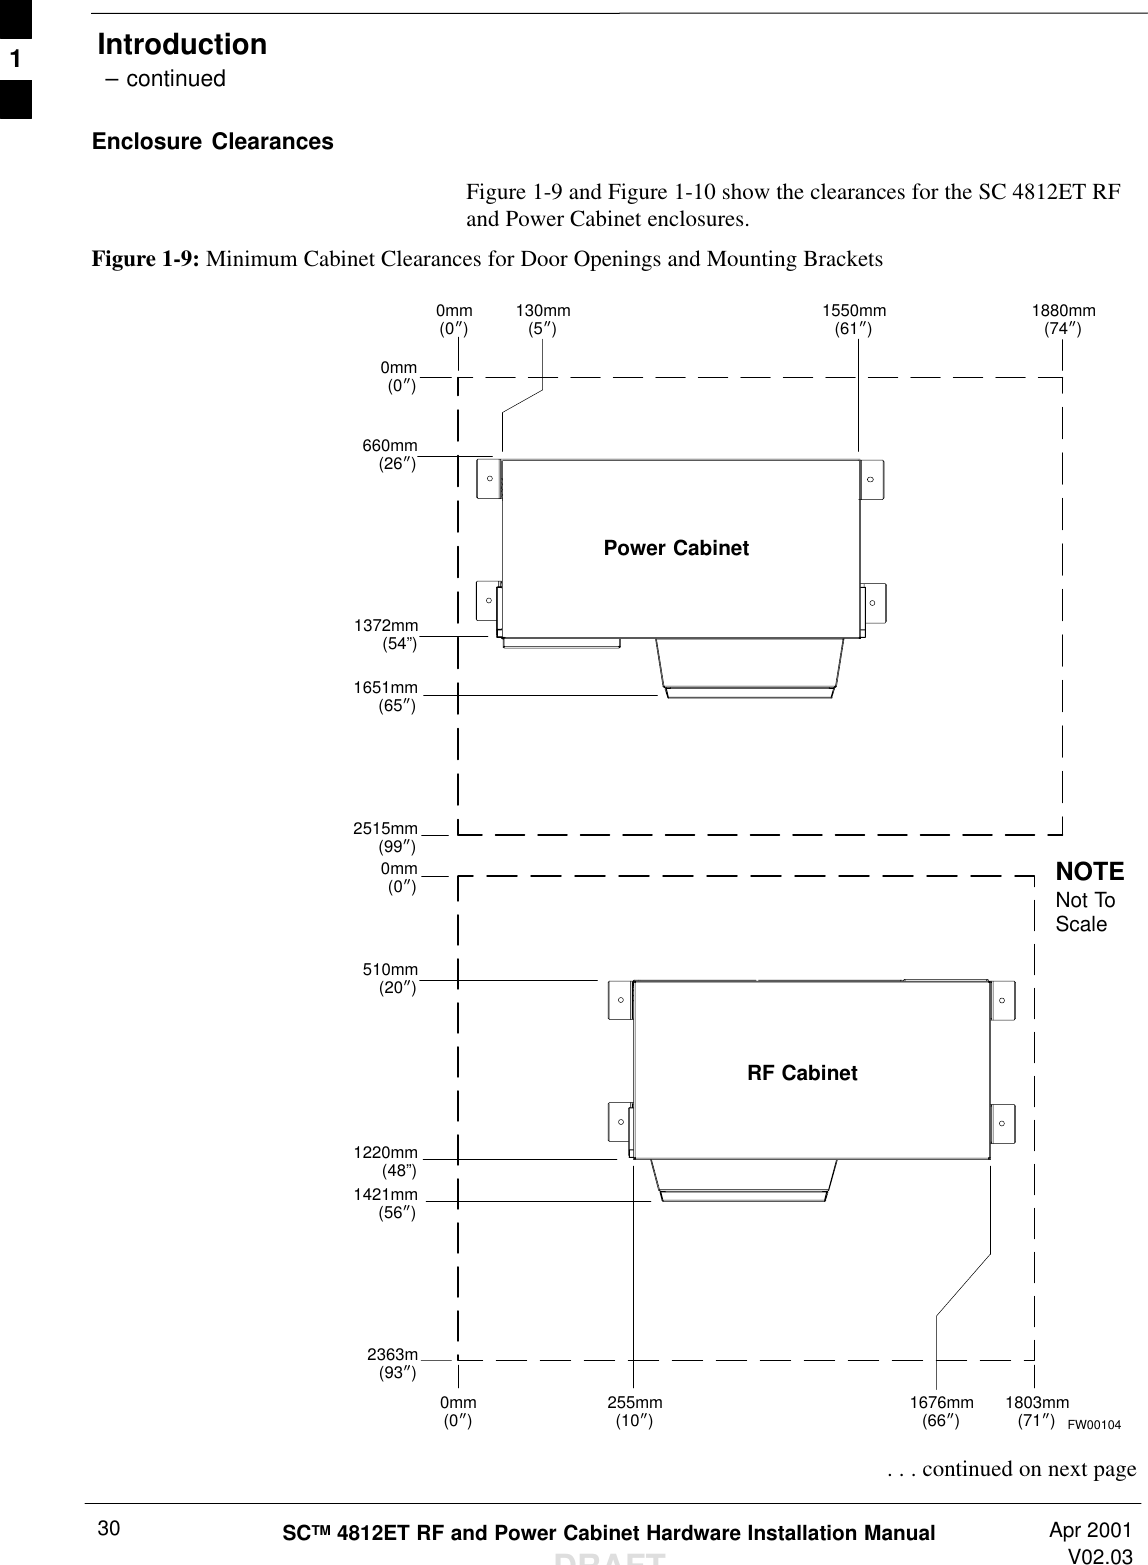 Introduction – continuedSCTM 4812ET RF and Power Cabinet Hardware Installation ManualDRAFTApr 2001V02.0330Enclosure ClearancesFigure 1-9 and Figure 1-10 show the clearances for the SC 4812ET RFand Power Cabinet enclosures.Figure 1-9: Minimum Cabinet Clearances for Door Openings and Mounting BracketsPower CabinetRF CabinetNOTENot ToScale0mm(0I)1550mm(61I)1880mm(74I)660mm(26I)0mm(0I)255mm(10I)1676mm(66I)1803mm(71I)1372mm(54”)1651mm(65I)0mm(0I)510mm(20I)1220mm(48”)1421mm(56I)2515mm(99I)2363m(93I)130mm(5I)0mm(0I)FW00104 . . . continued on next page1